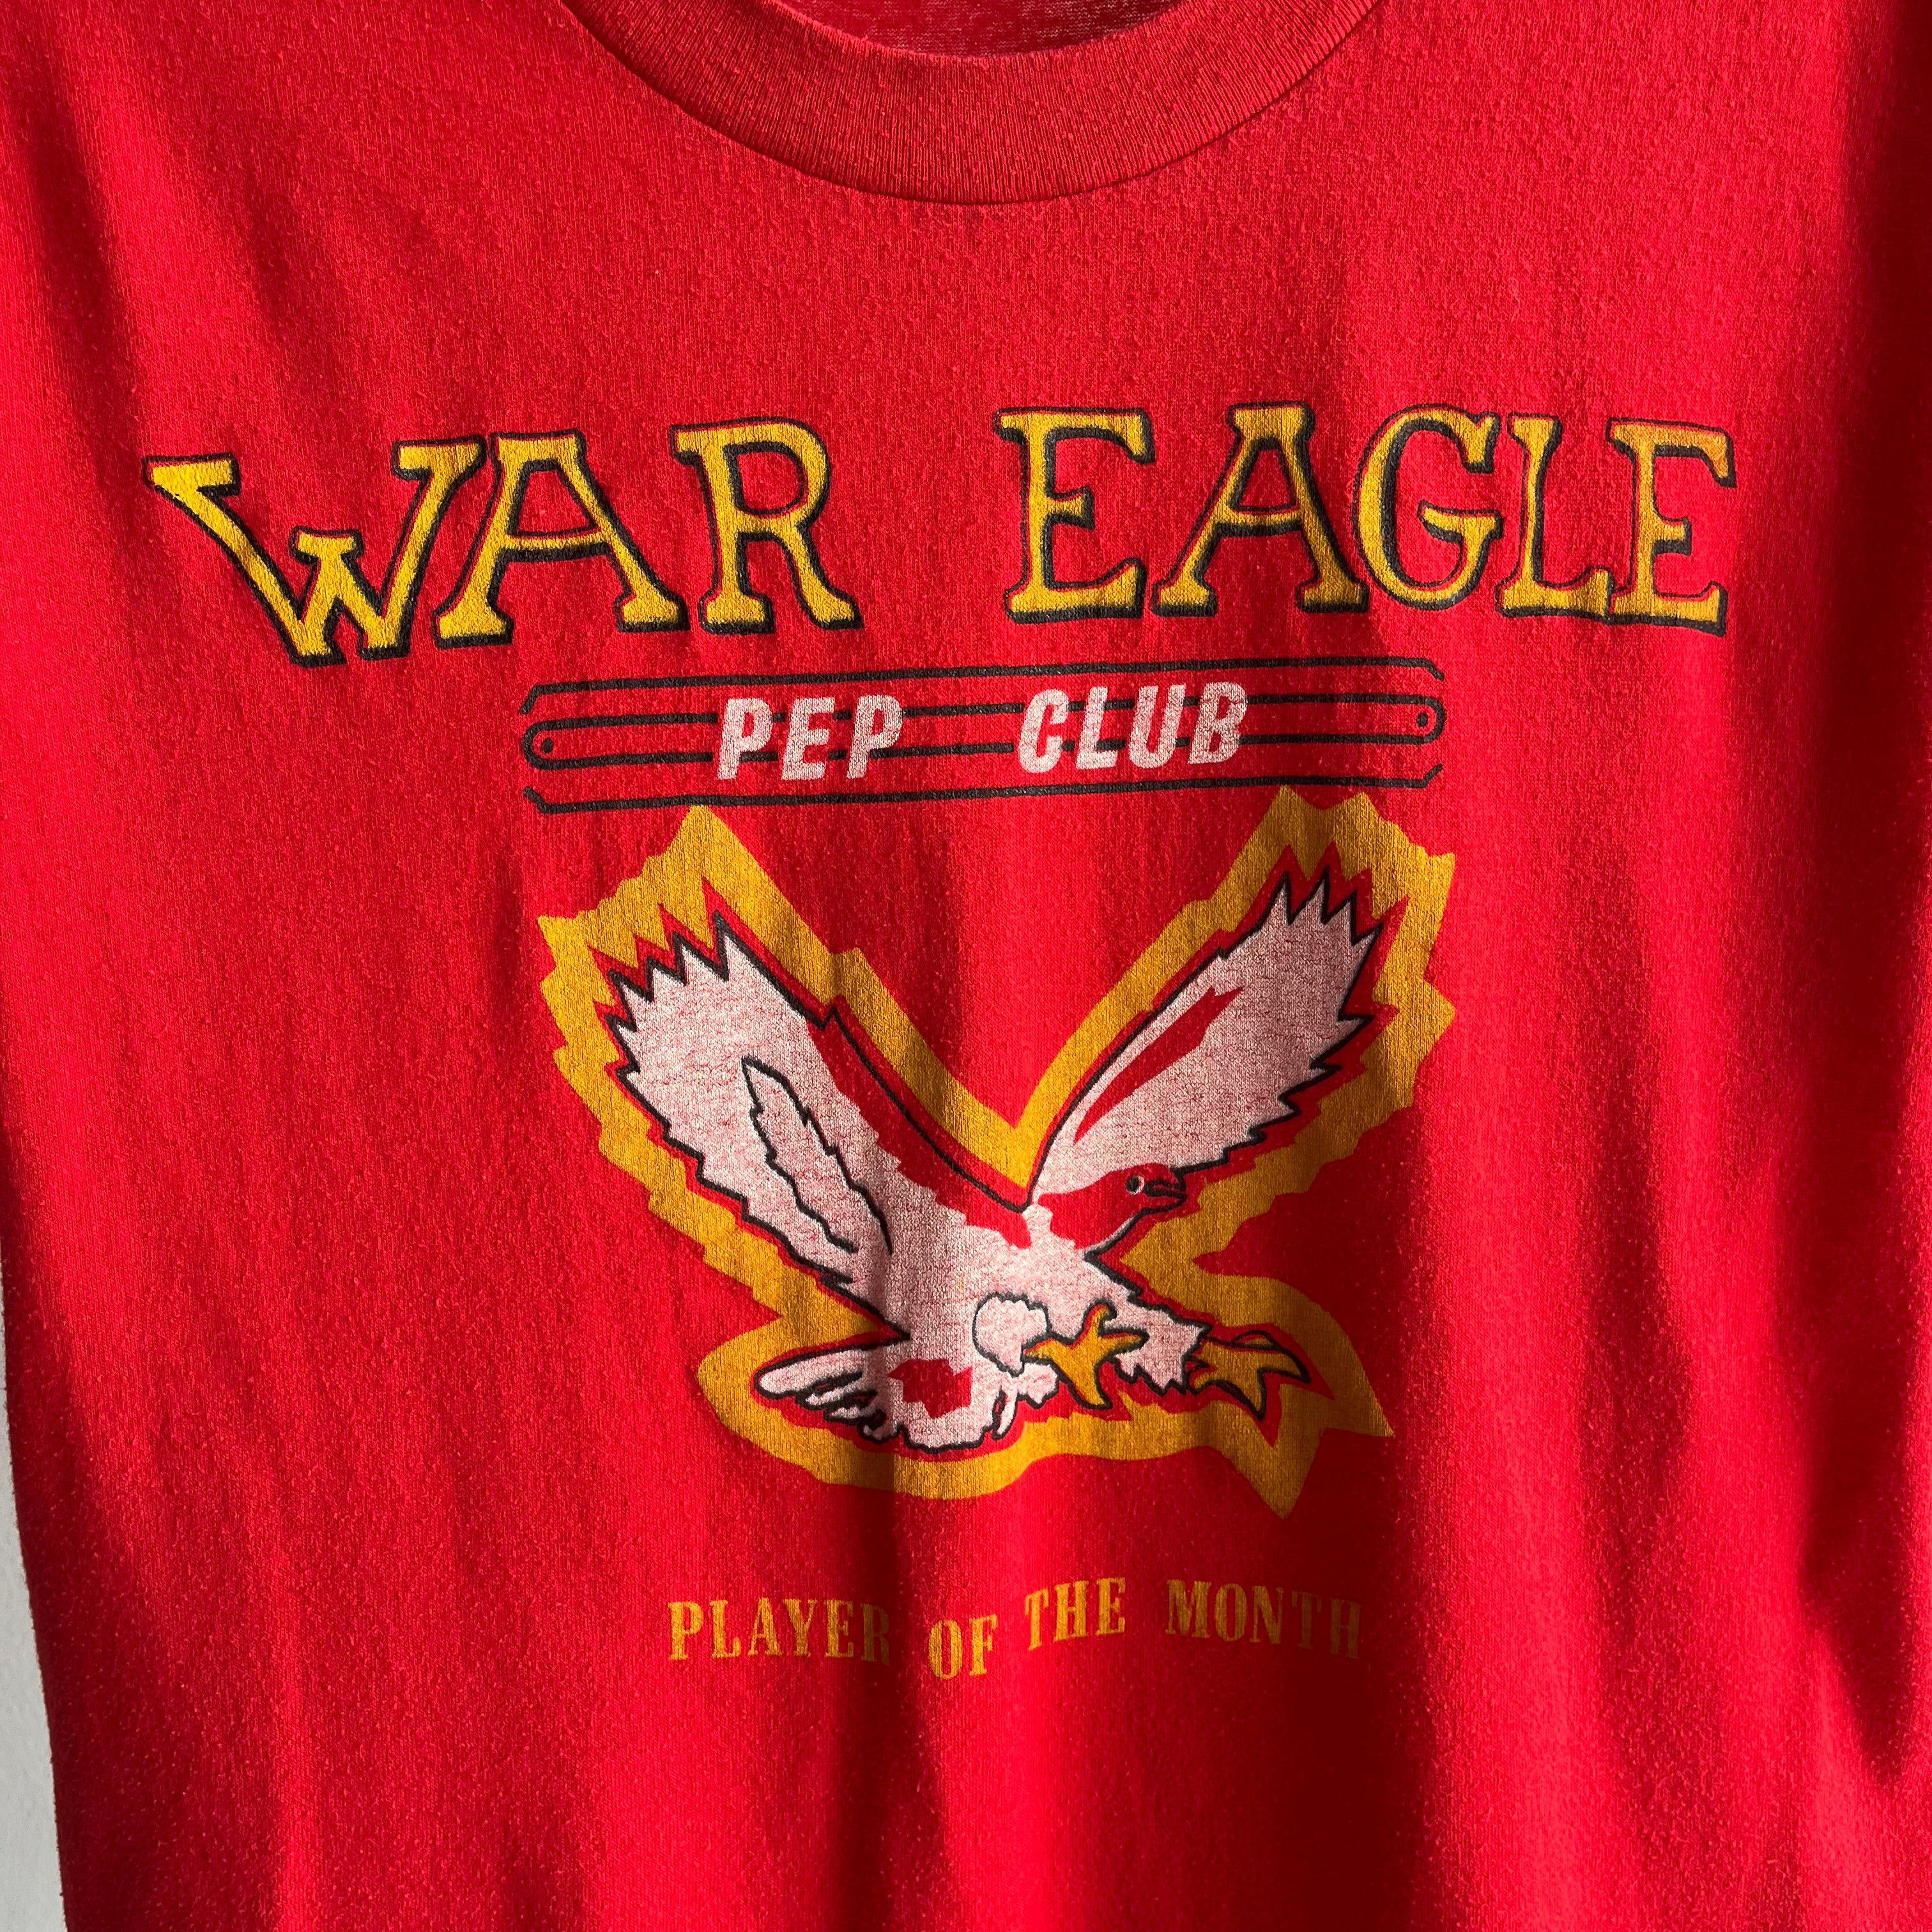 1980s War Eagle Pep Club - The Graphic!